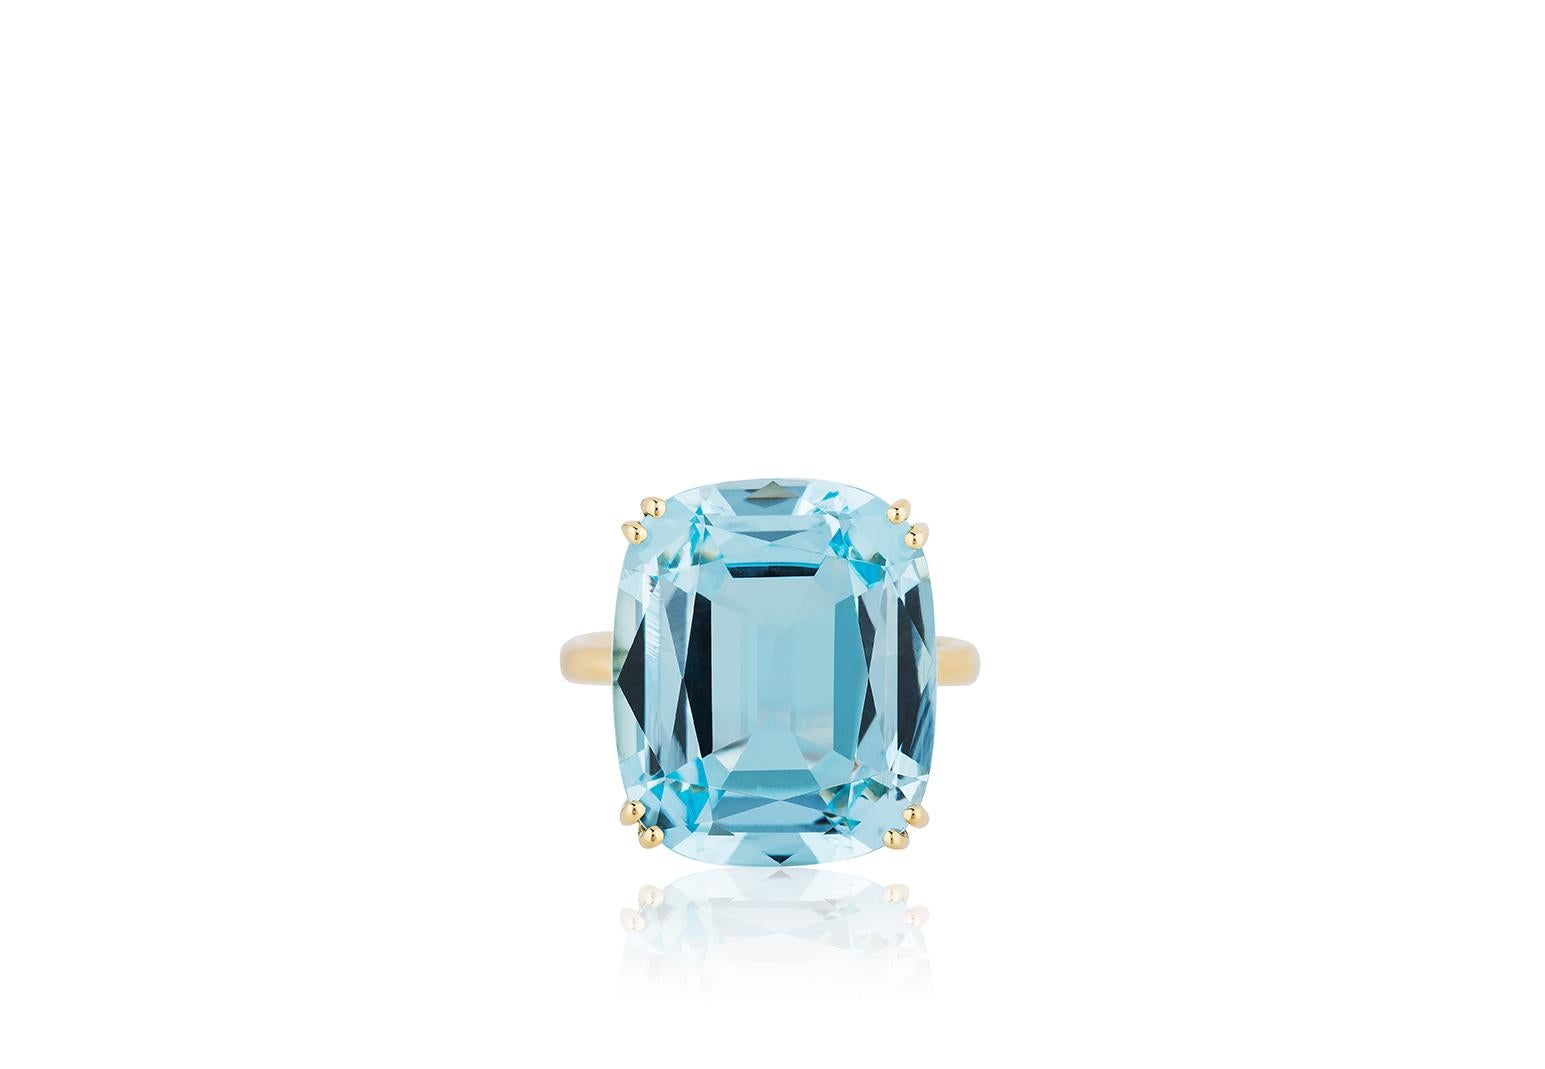 This beautiful Blue Topaz Cushion Ring with Tube Shank is from our 'Gossip' Collection. Like any good piece of gossip, it carries a hint of shock value. If you want to make a statement, this is the perfect ring to do it.

* Gemstone: 100% Earth